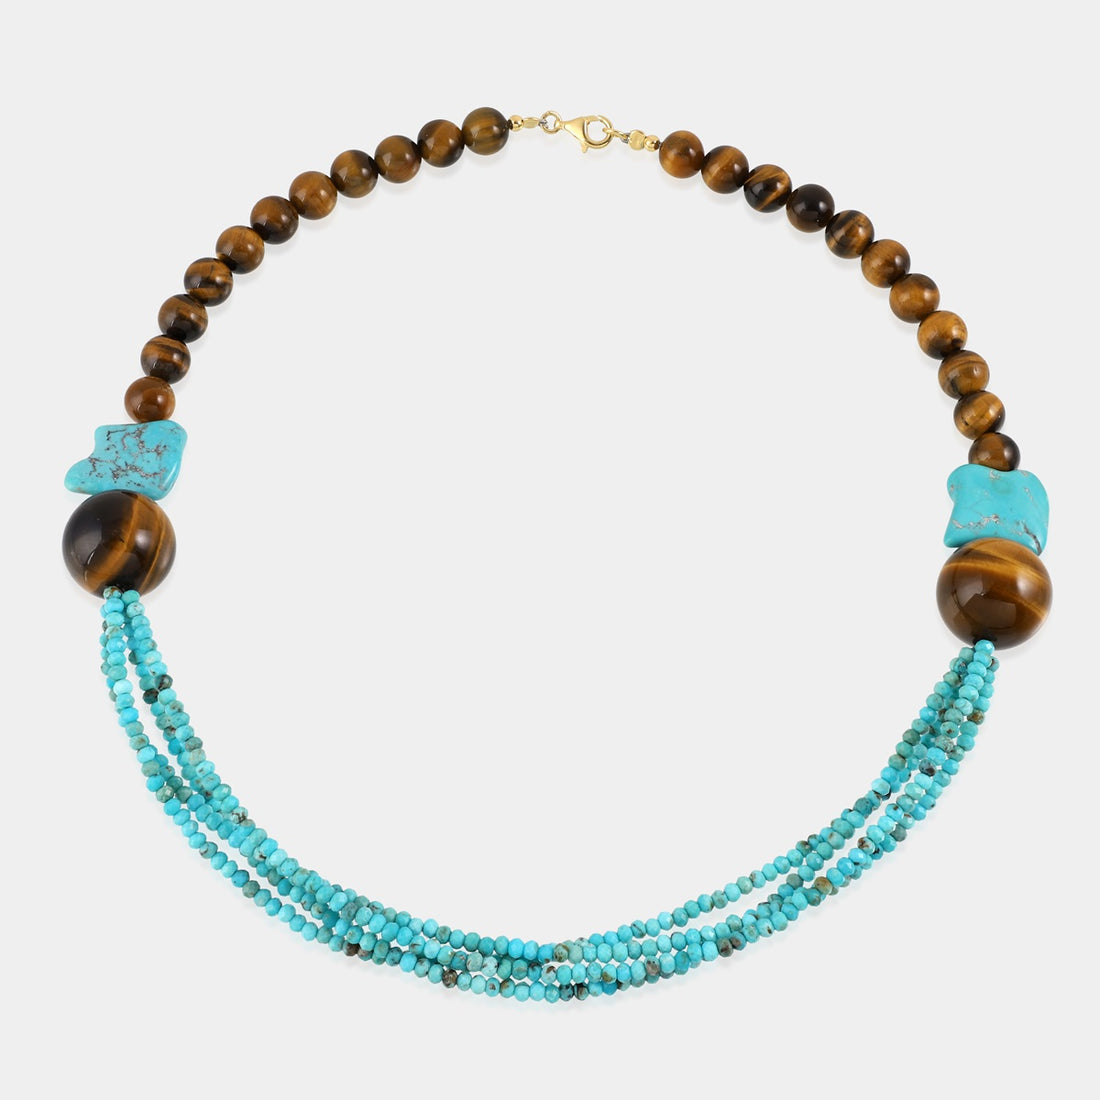 Natural Gemstone Necklace with Varied Bead Sizes